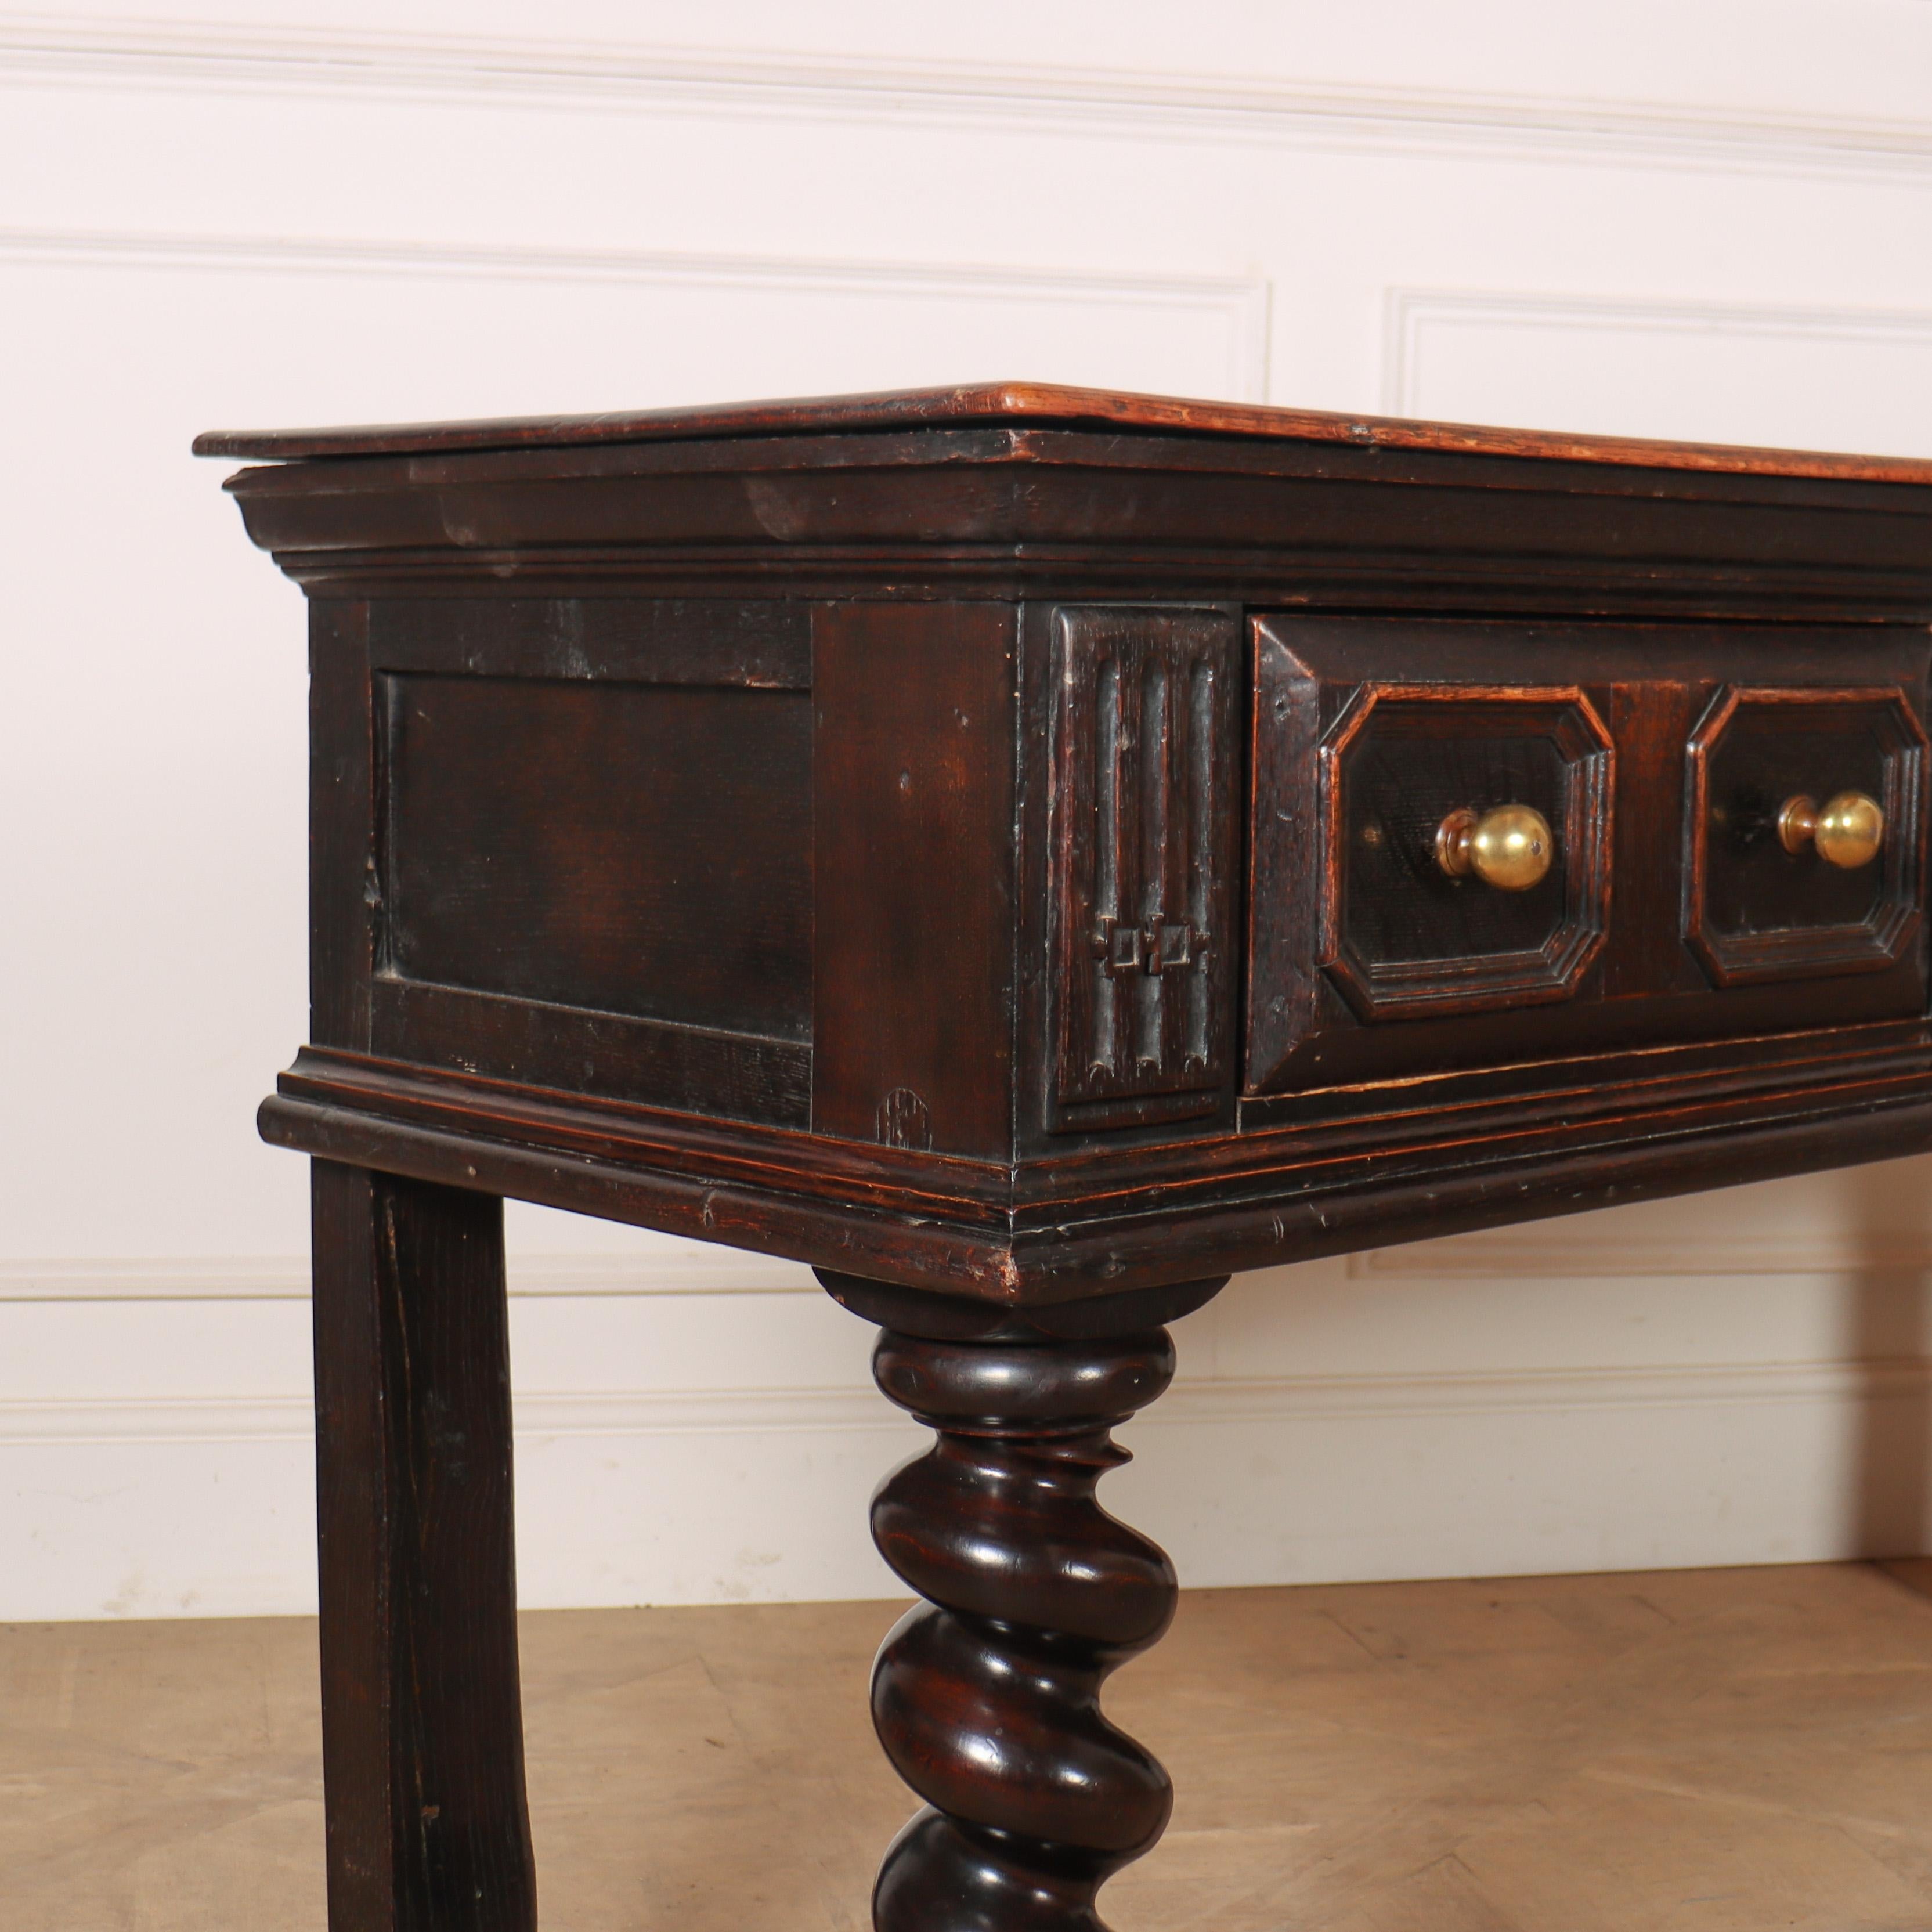 19th C English 3 drawer oak dresser base with barley twist legs. 1830.

Reference: 8131

Dimensions
70.5 inches (179 cms) Wide
20.5 inches (52 cms) Deep
35.5 inches (90 cms) High